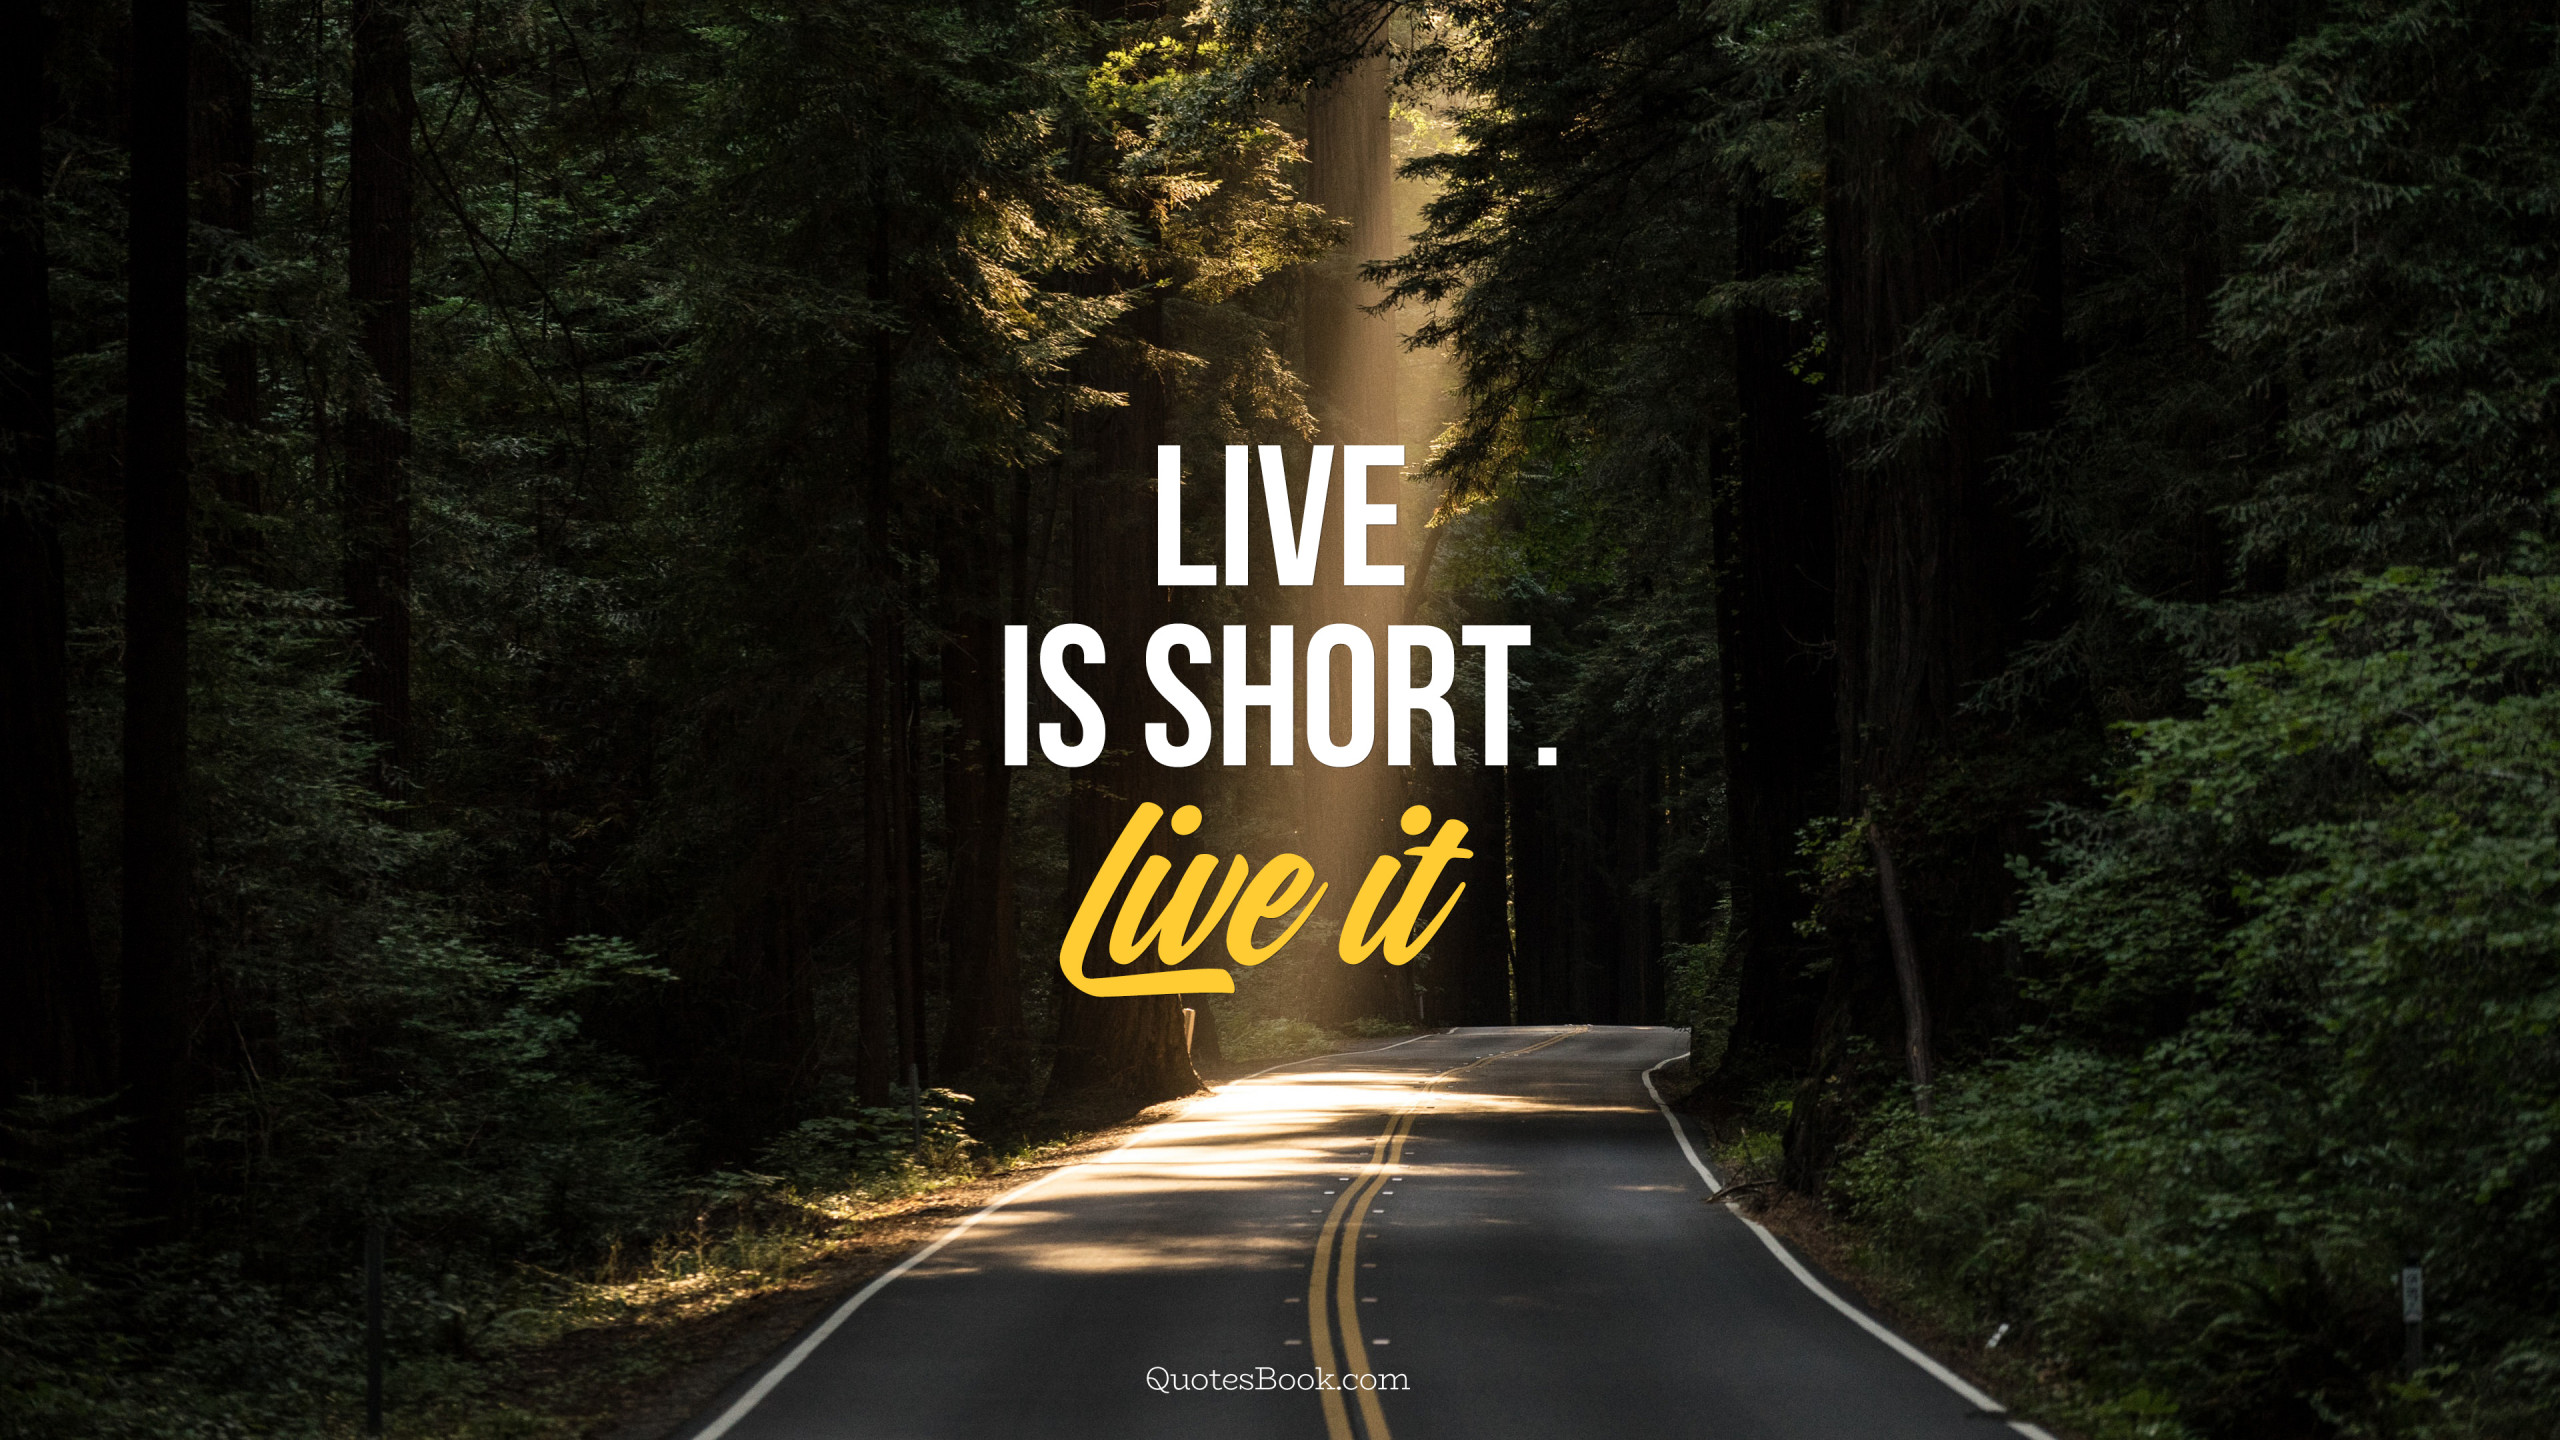 Life is short. Live it - QuotesBook